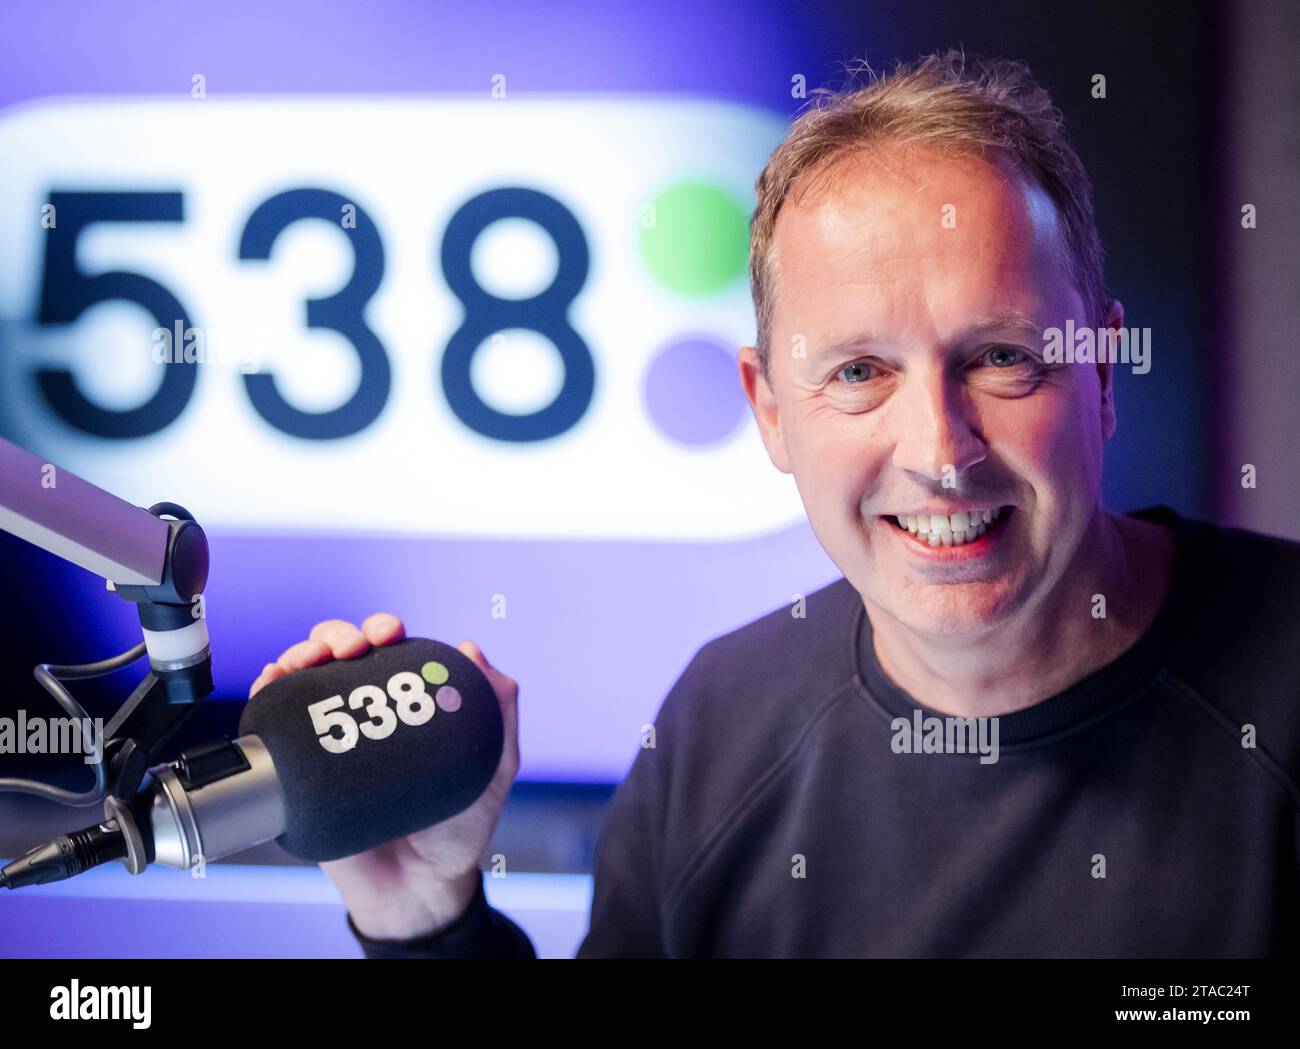 HILVERSUM - Portrait of Edwin Evers in the studio of radio station 538,  where he returns as a DJ. In 2018, Evers announced that he would stop his  morning show at Radio